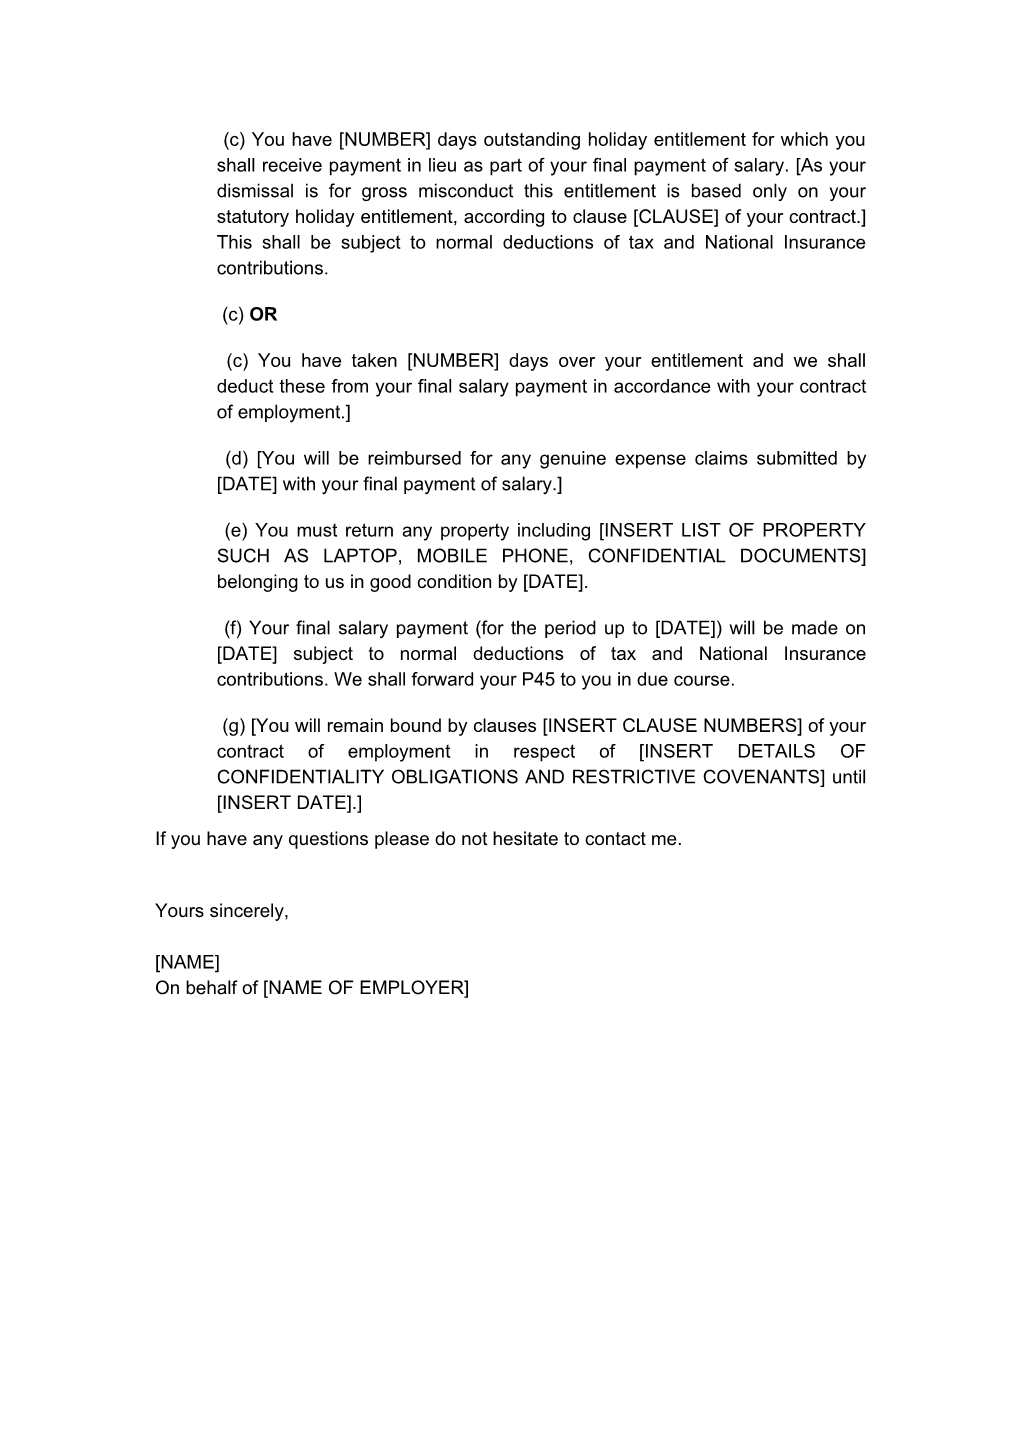 Letter to Confirm Summary Dismissal for Gross Misconduct Following a Hearing